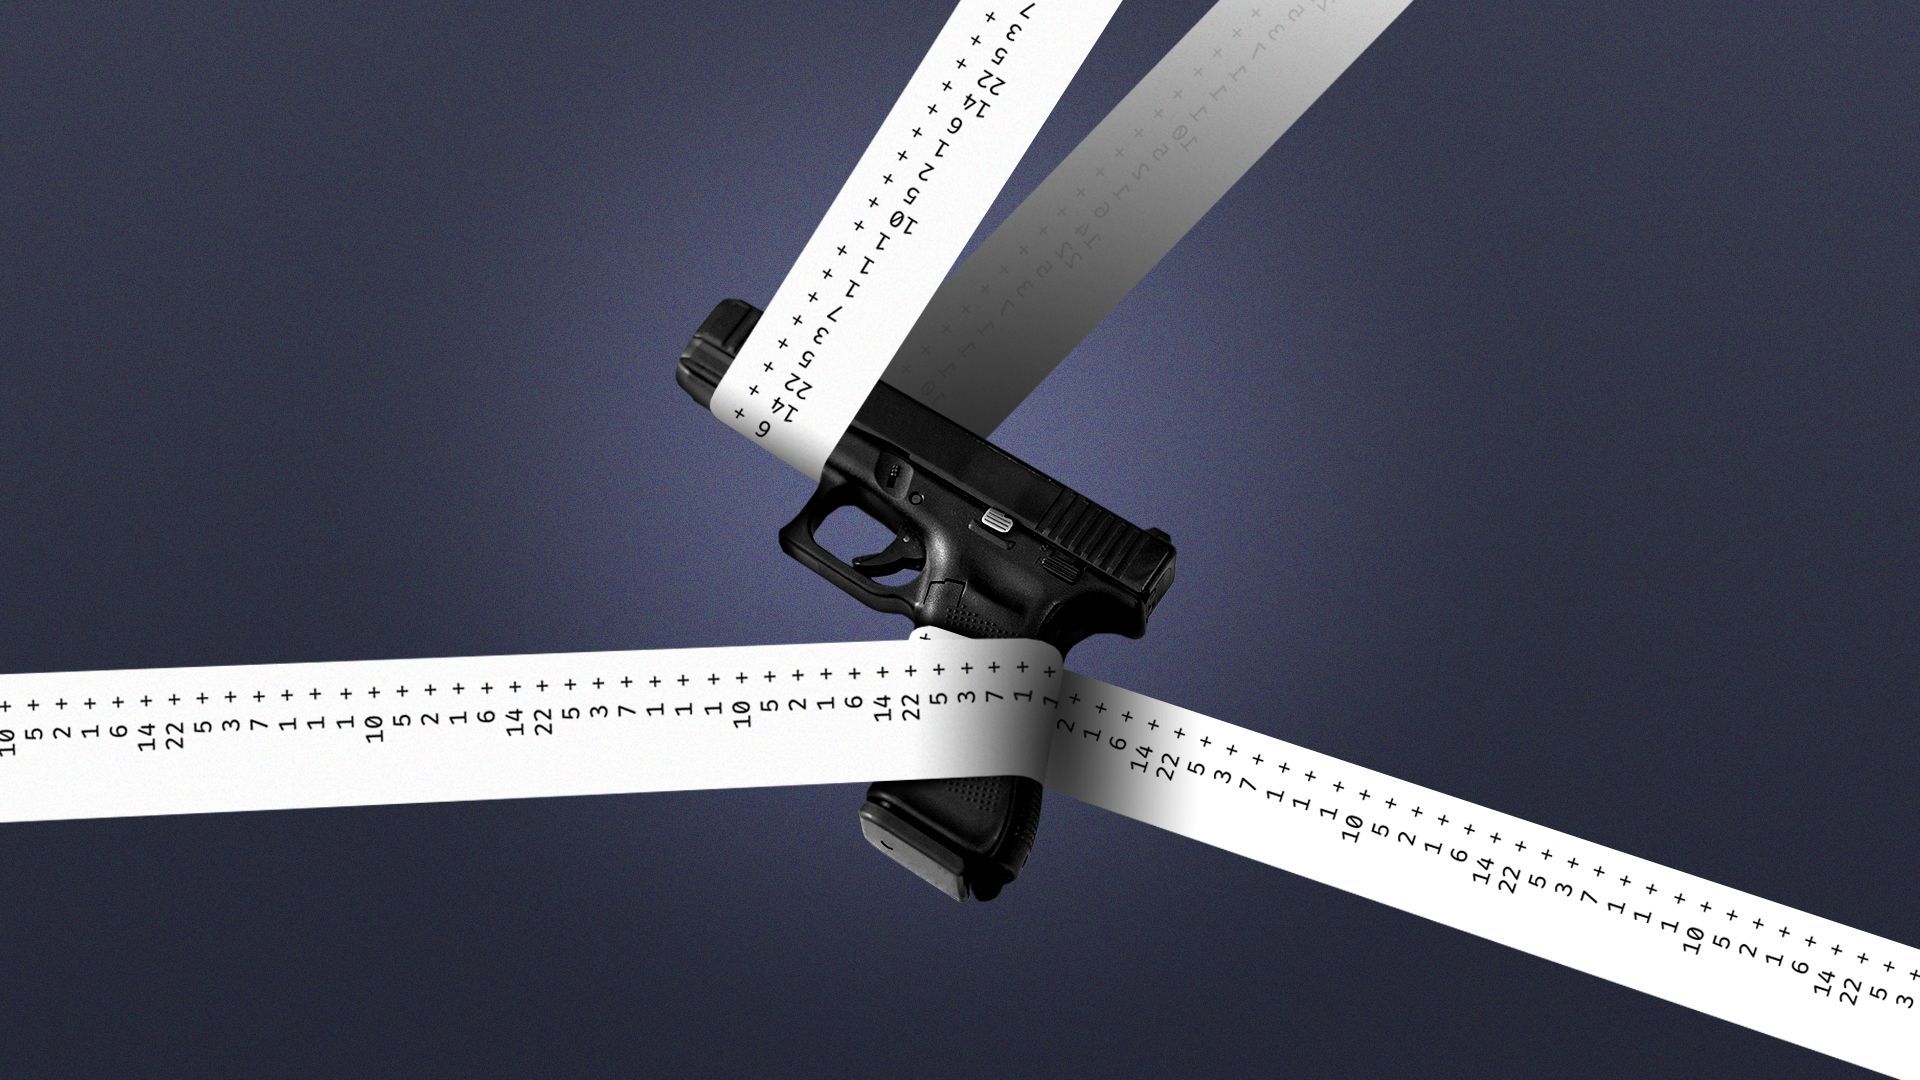 Illustration of a handgun tangled and strung up by calculator tape with numbers printed